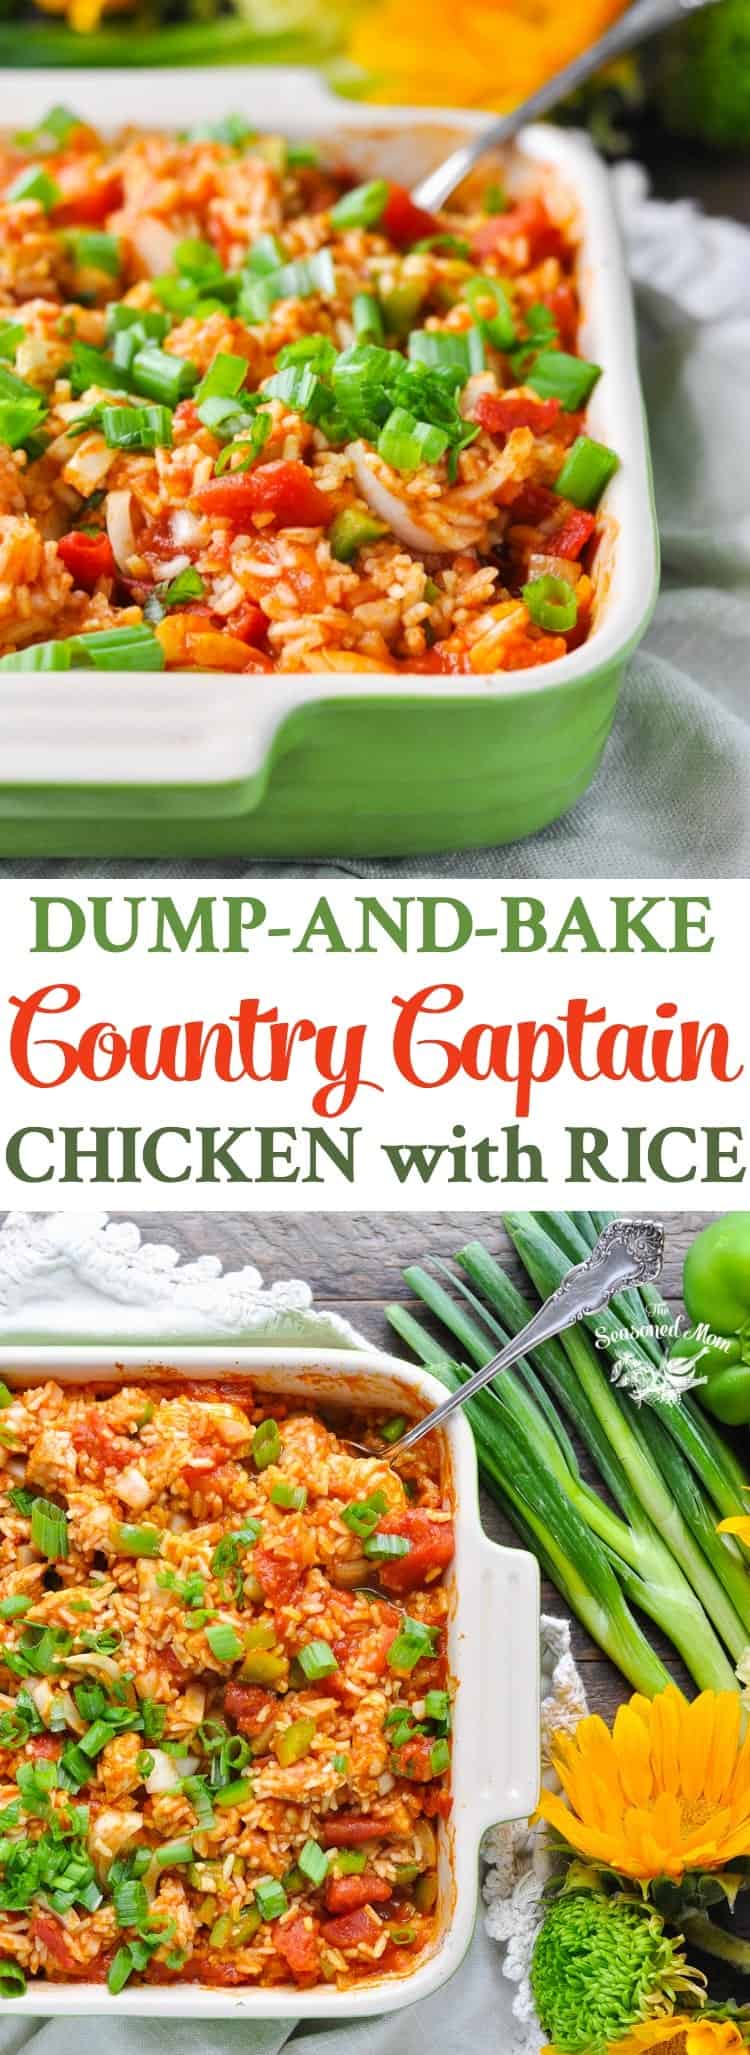 Dump-and-Bake Country Captain Chicken and 30 Days of Dump-and-Bake Dinners! Meal Planning | Meal Prep | Easy Dinner Recipes | Dinner Ideas | Casserole Recipes | Dump and Go Recipes | Chicken Breast Recipes | Pasta Recipes | 5 Ingredient of Less Dinner Recipes